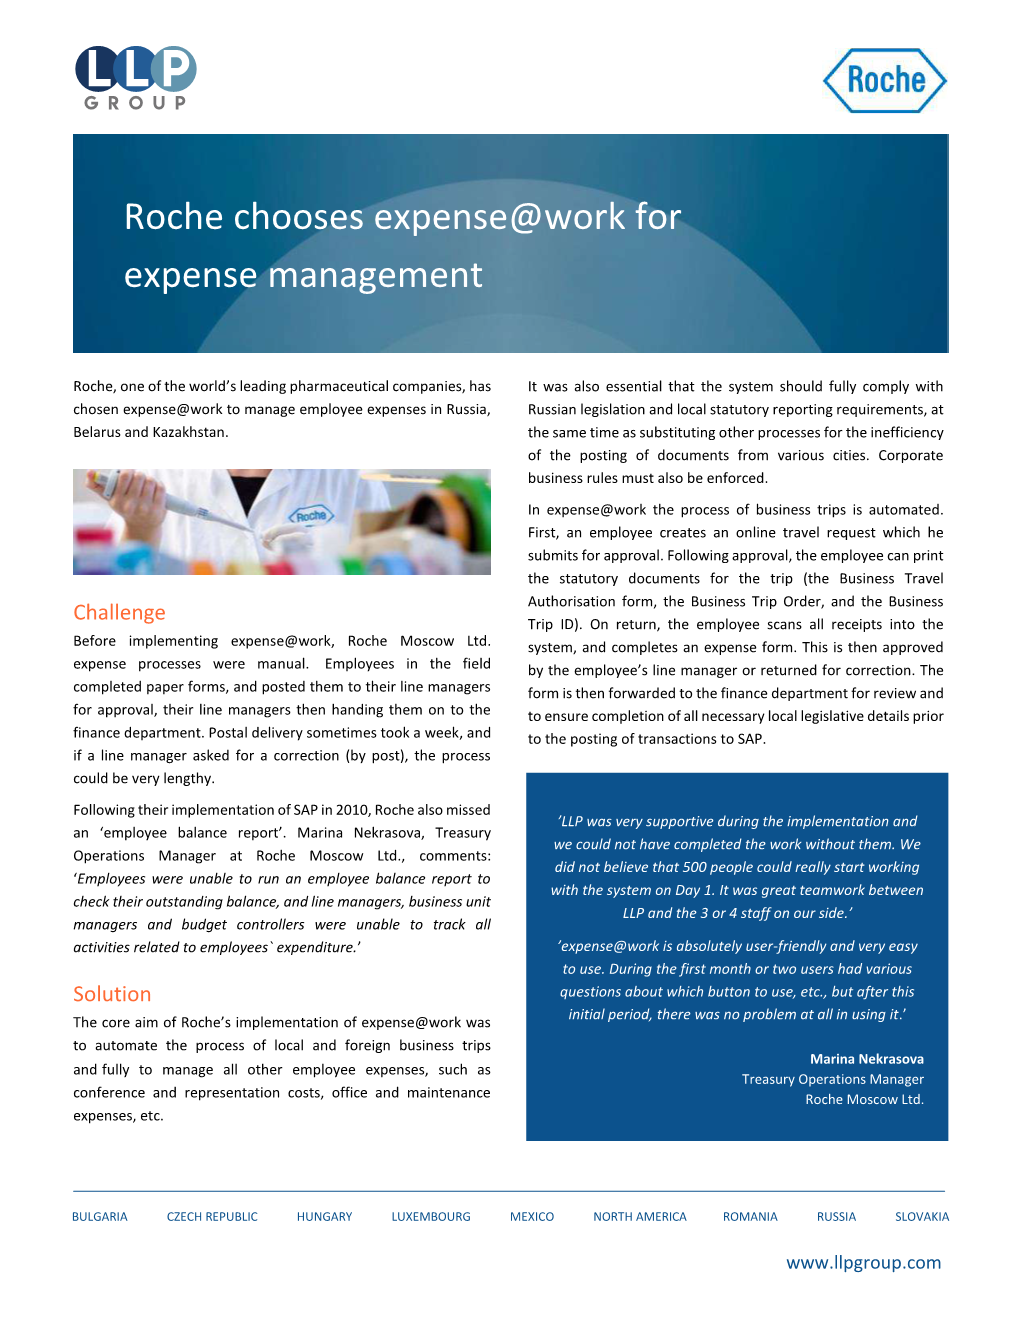 Roche Chooses Expense@Work for Expense Management